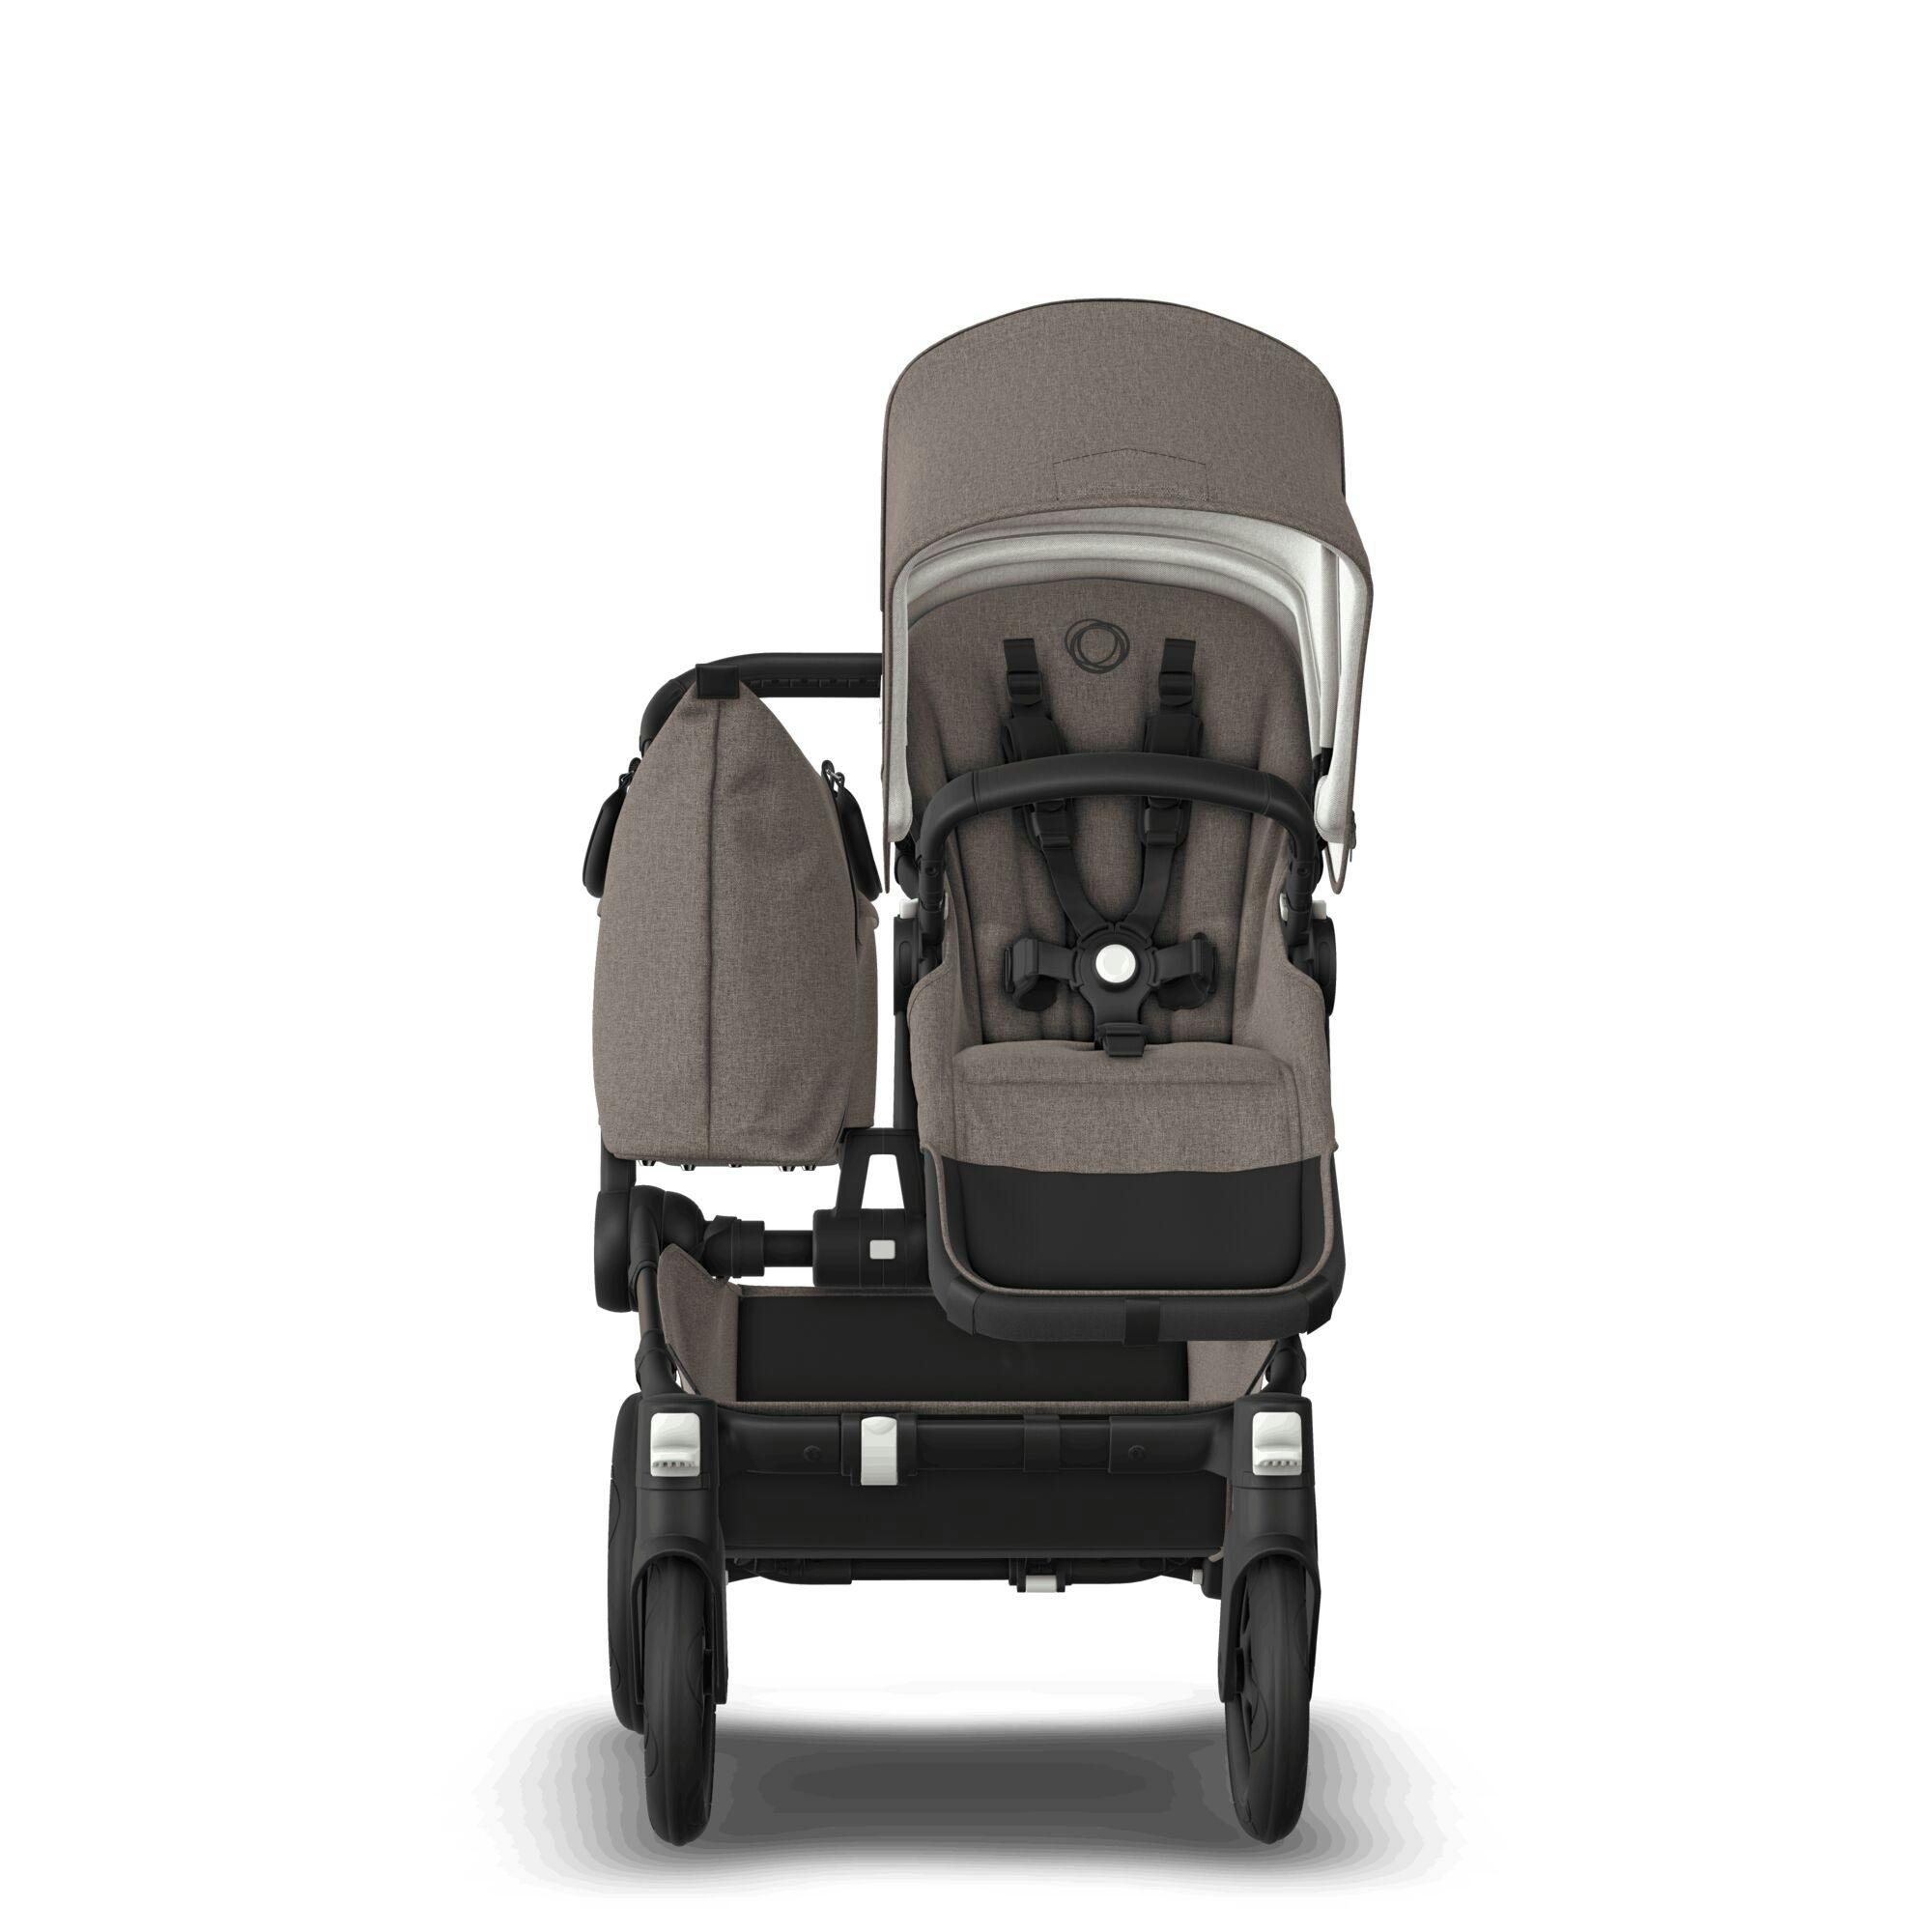 Bugaboo Donkey 5 Mineral Mono Complete Black/Taupe